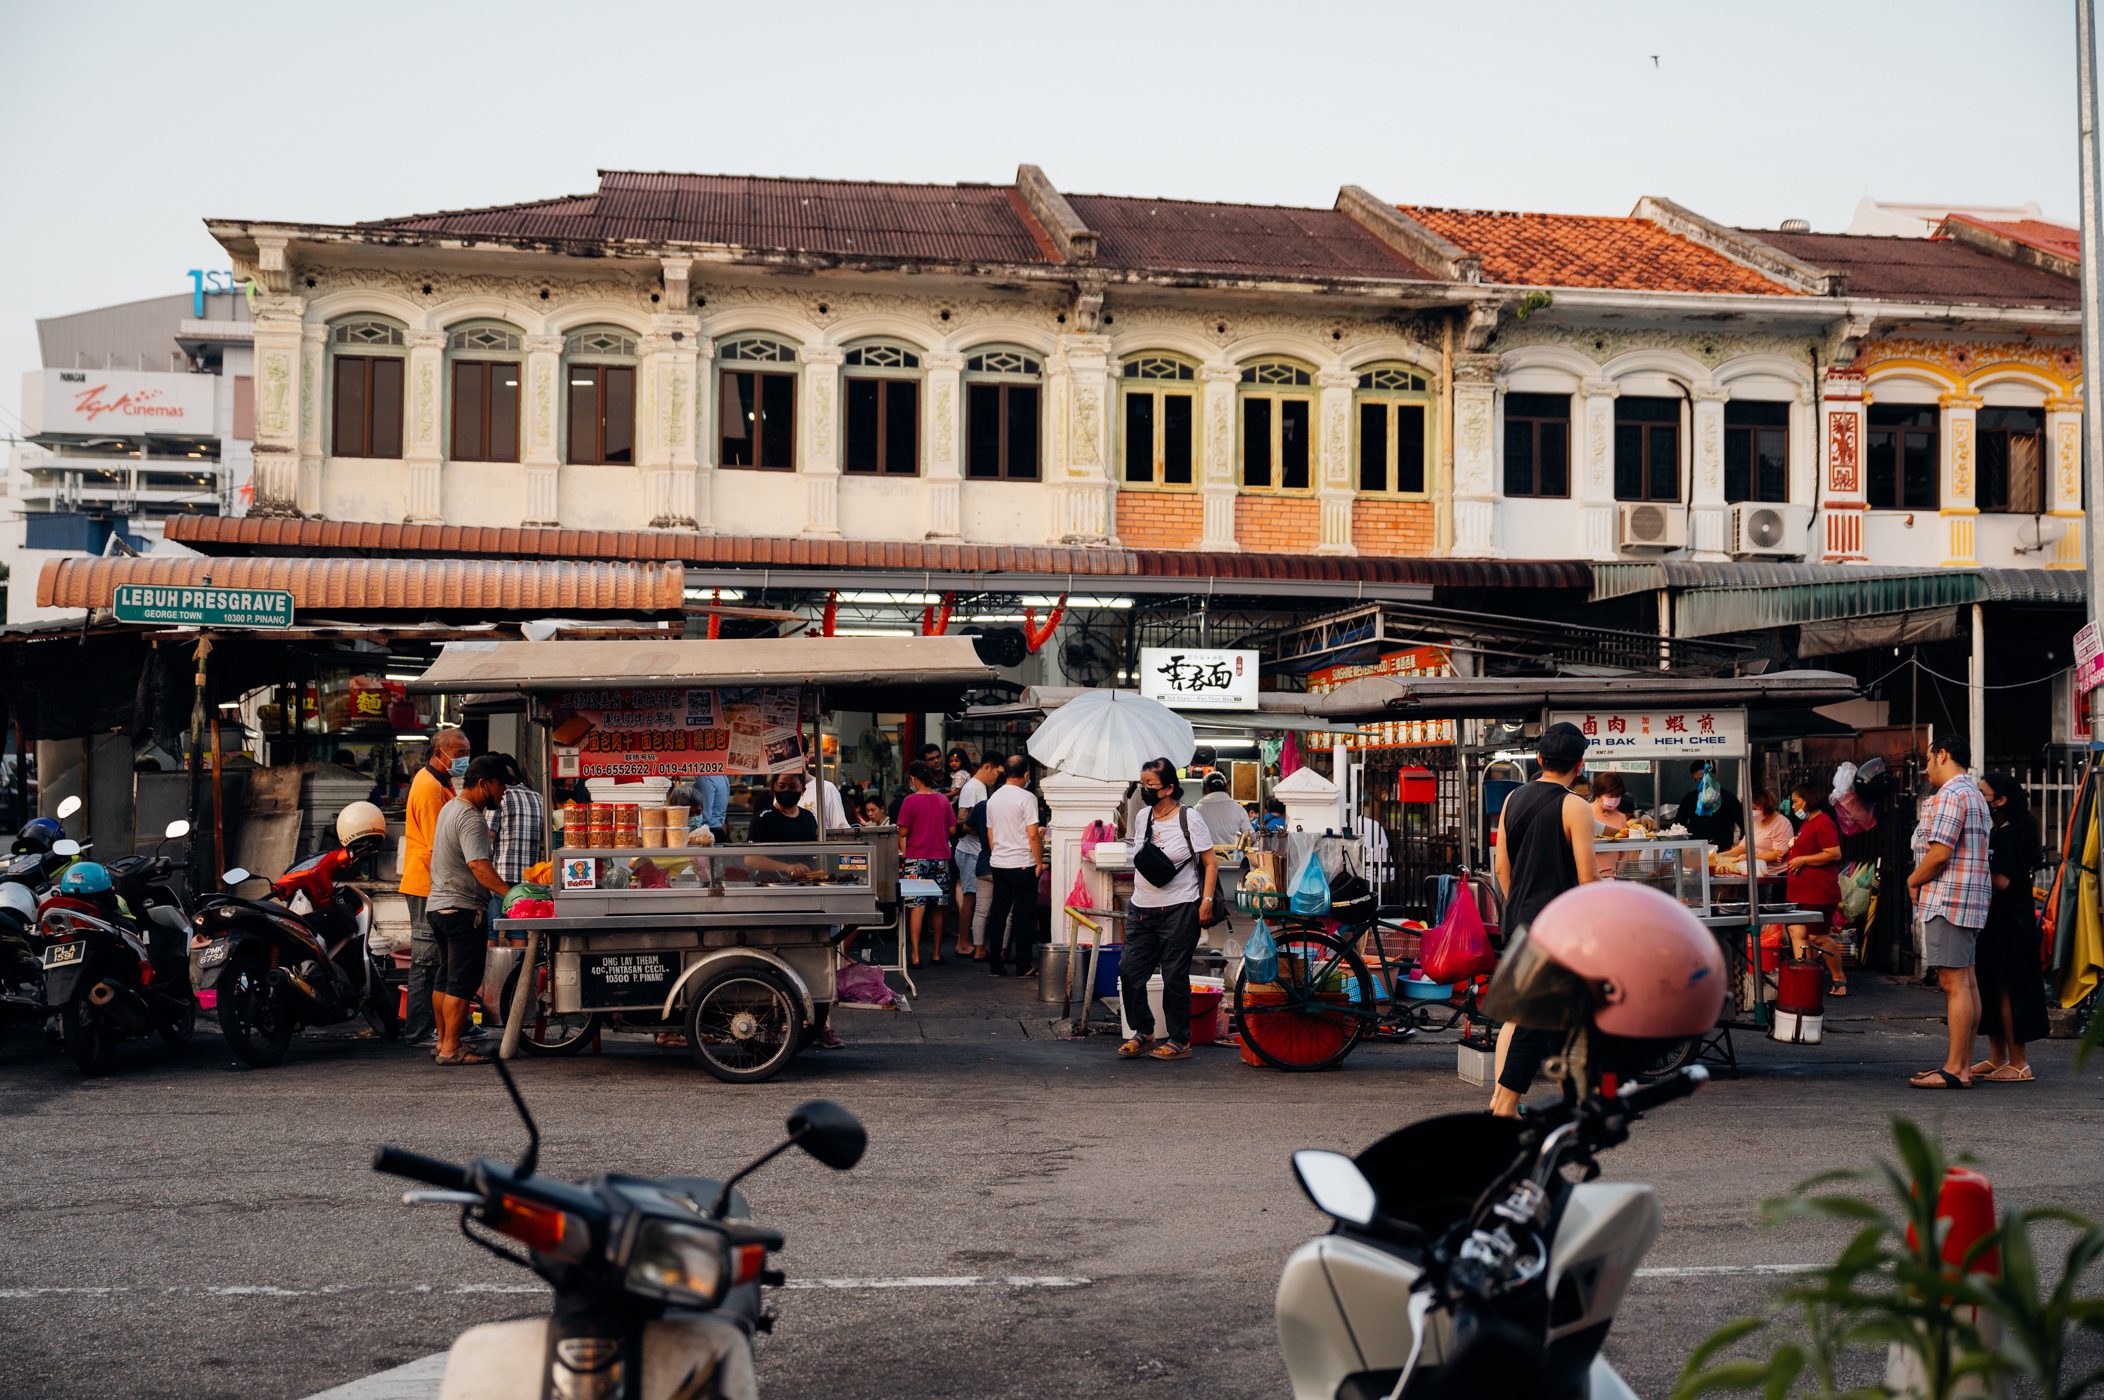 George Town Penang - part of a 3 week Malaysia itinerary